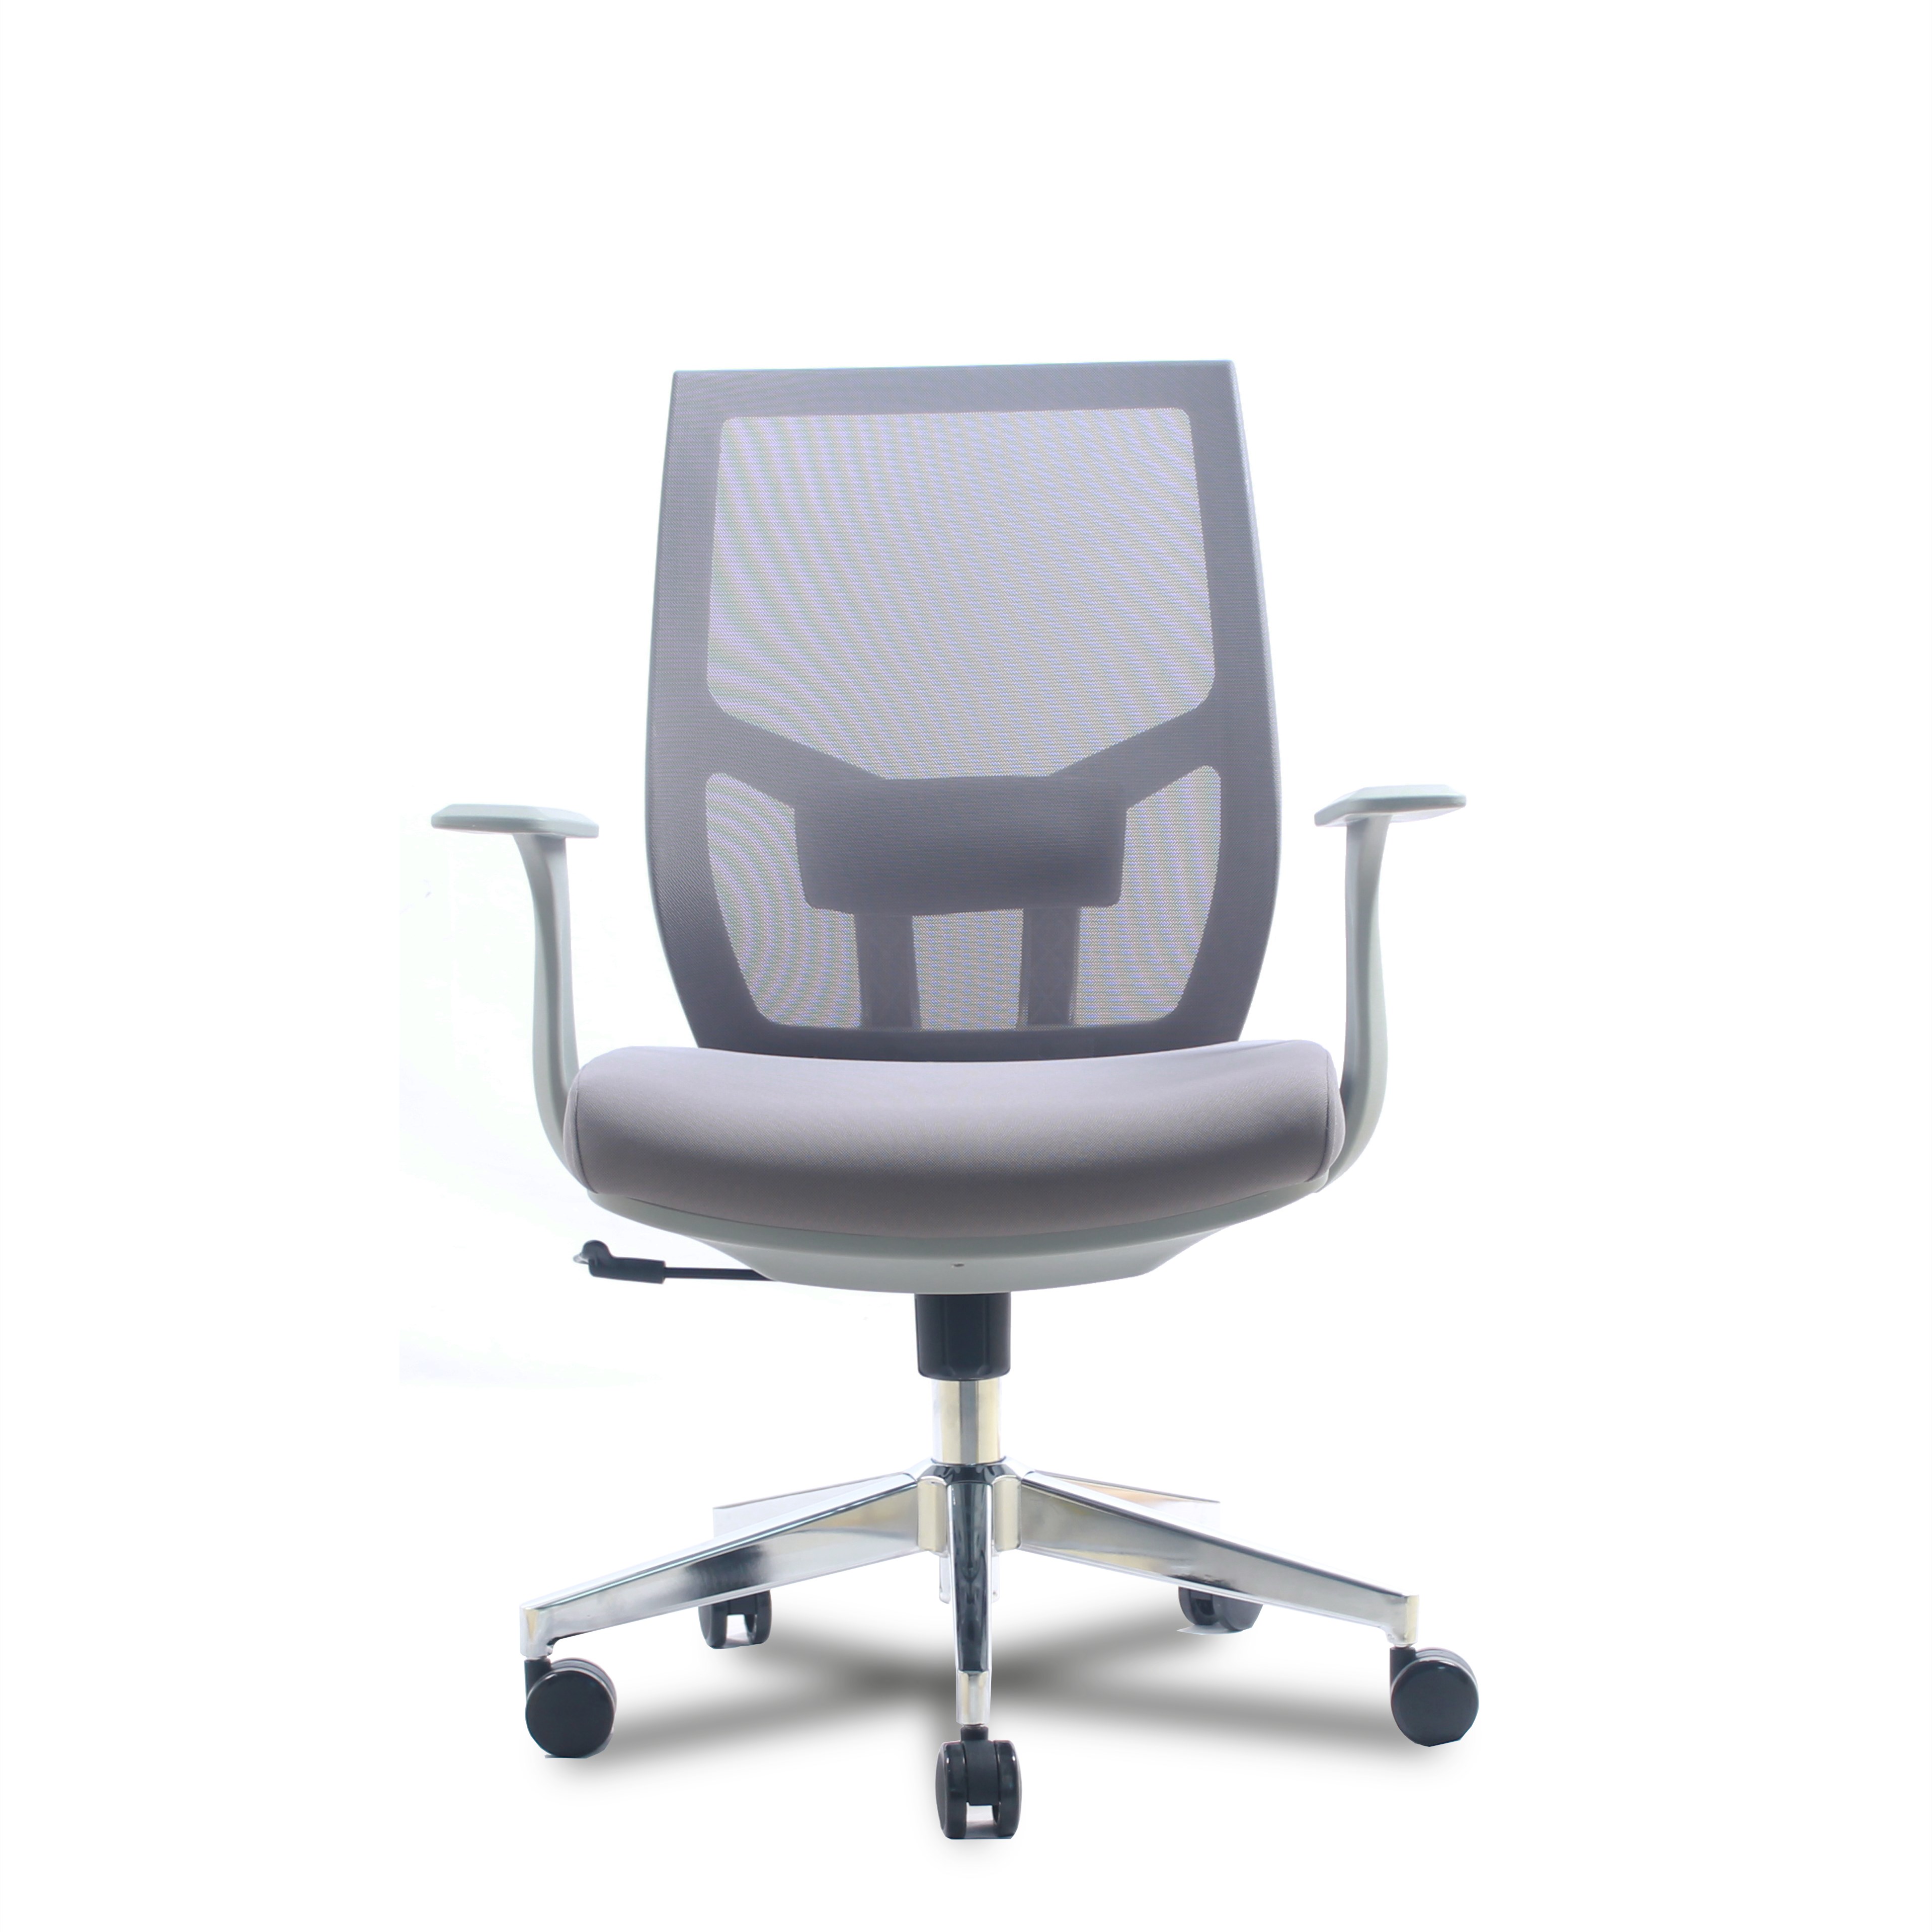 Manager Chair  MS1810-B -GREY